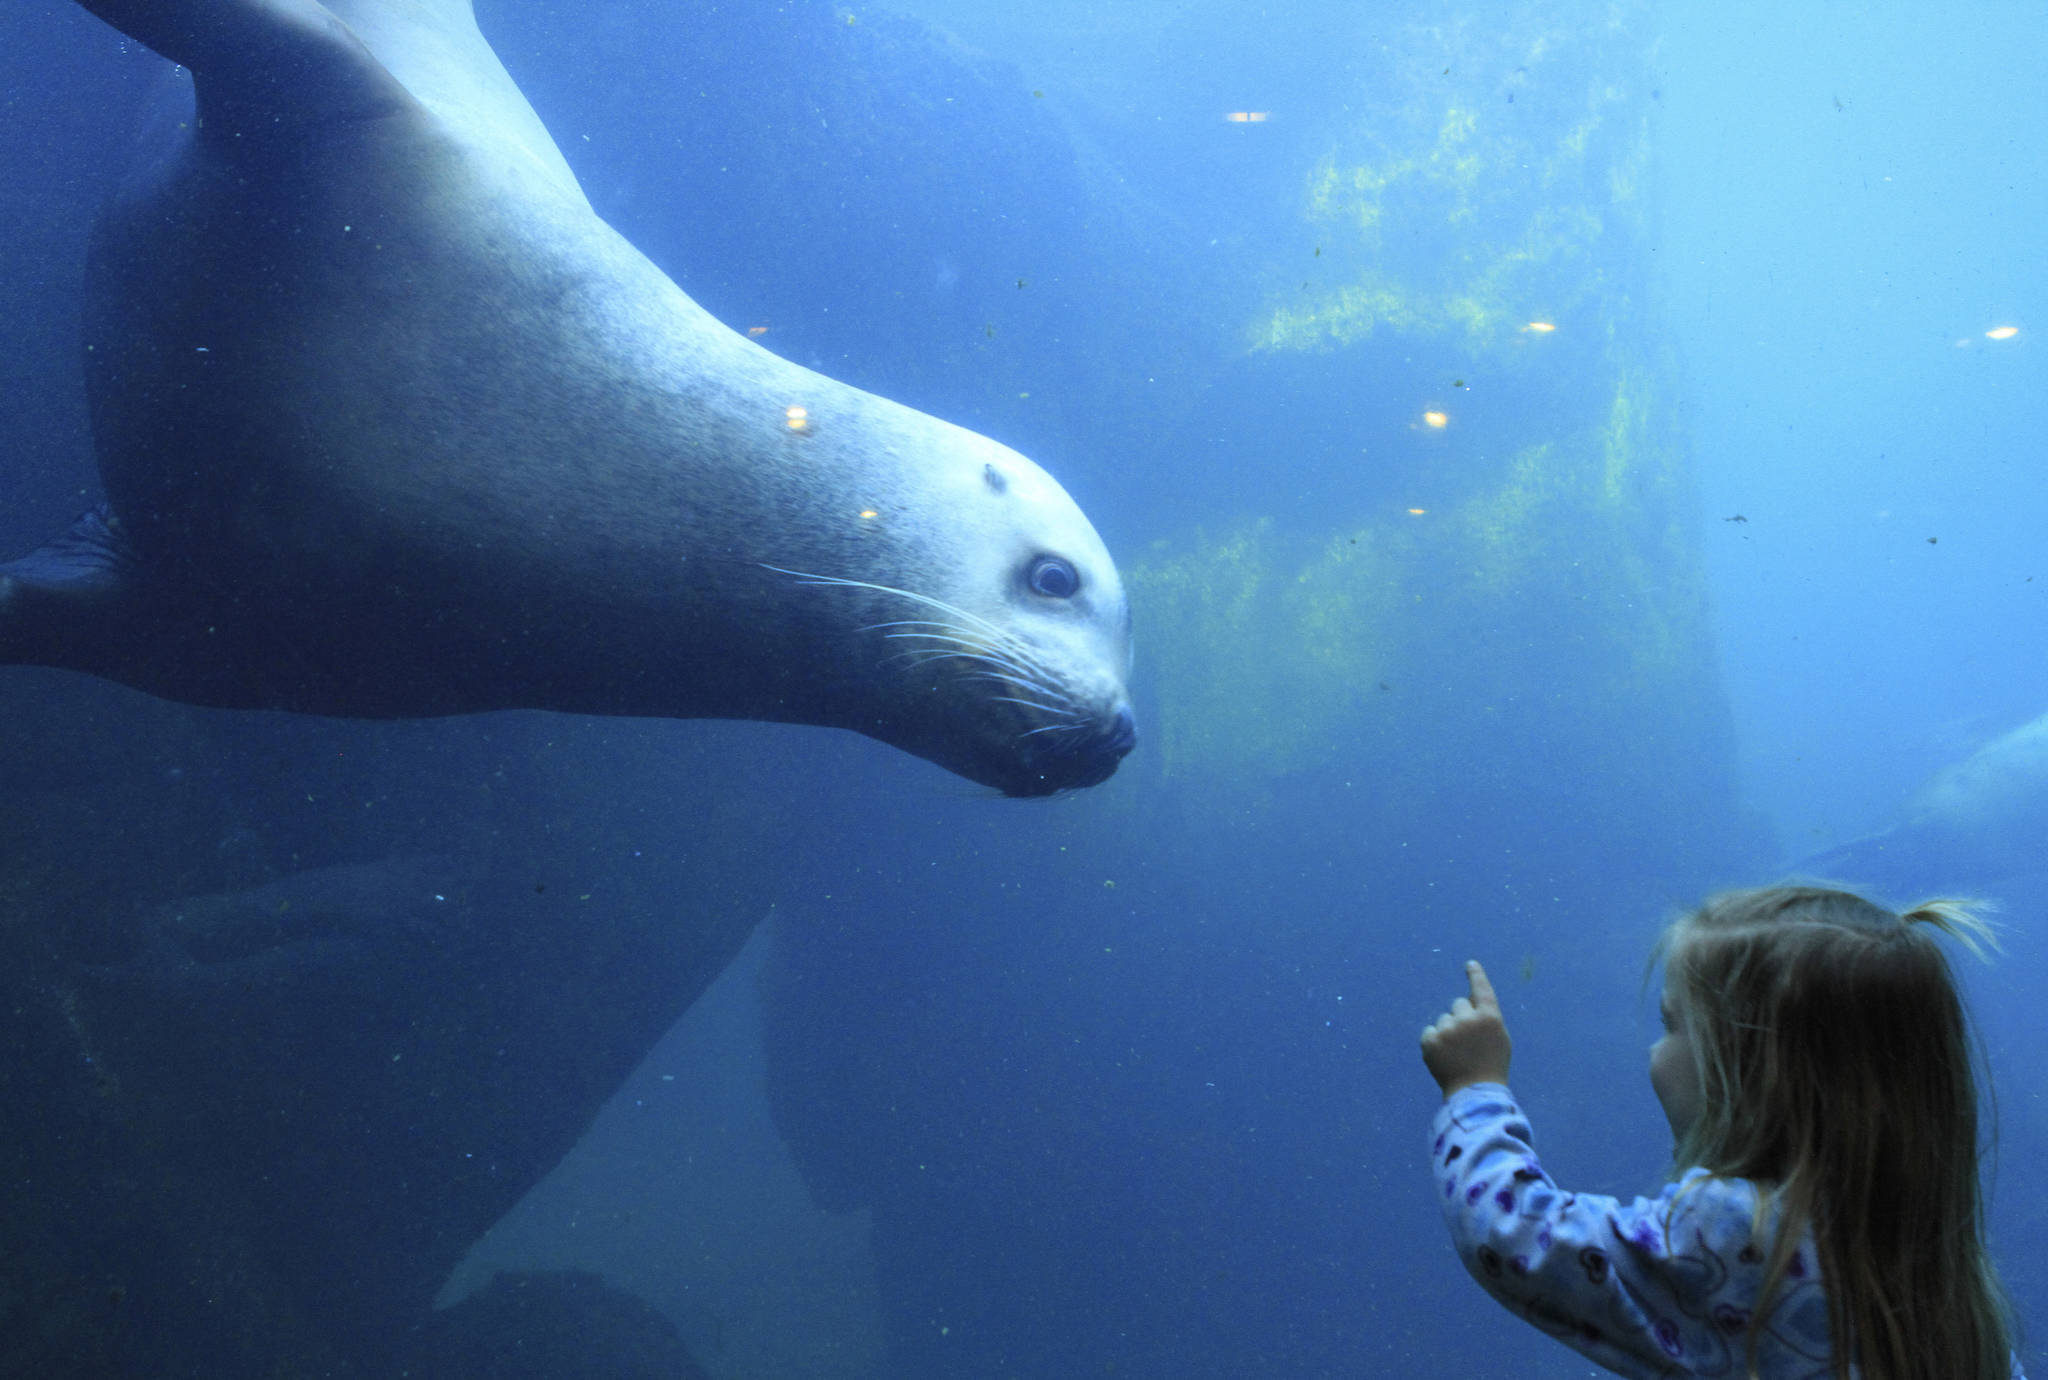 Elin Lunoe, and Pilot, a Steller sea lion, check each other out at a tank at the Alaska SeaLife Center in Seward in this February 2015 photo. The Alaska SeaLife Center is in jeopardy of closing after concerns surrounding the coronavirus pandemic have drastically reduced visitation rates. (AP Photo | Dan Joling, File)